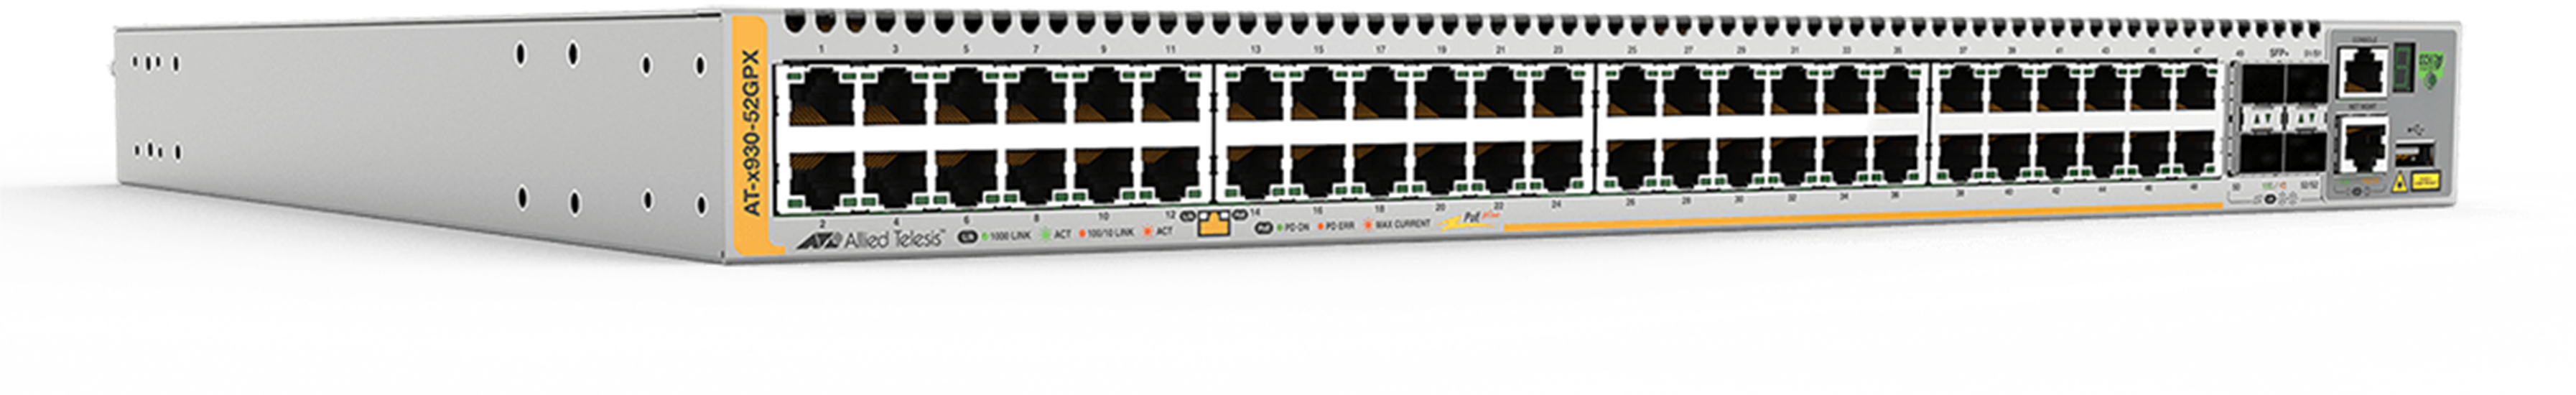 AT-x930 series - Advanced Gigabit Layer 3 Stackable Switch